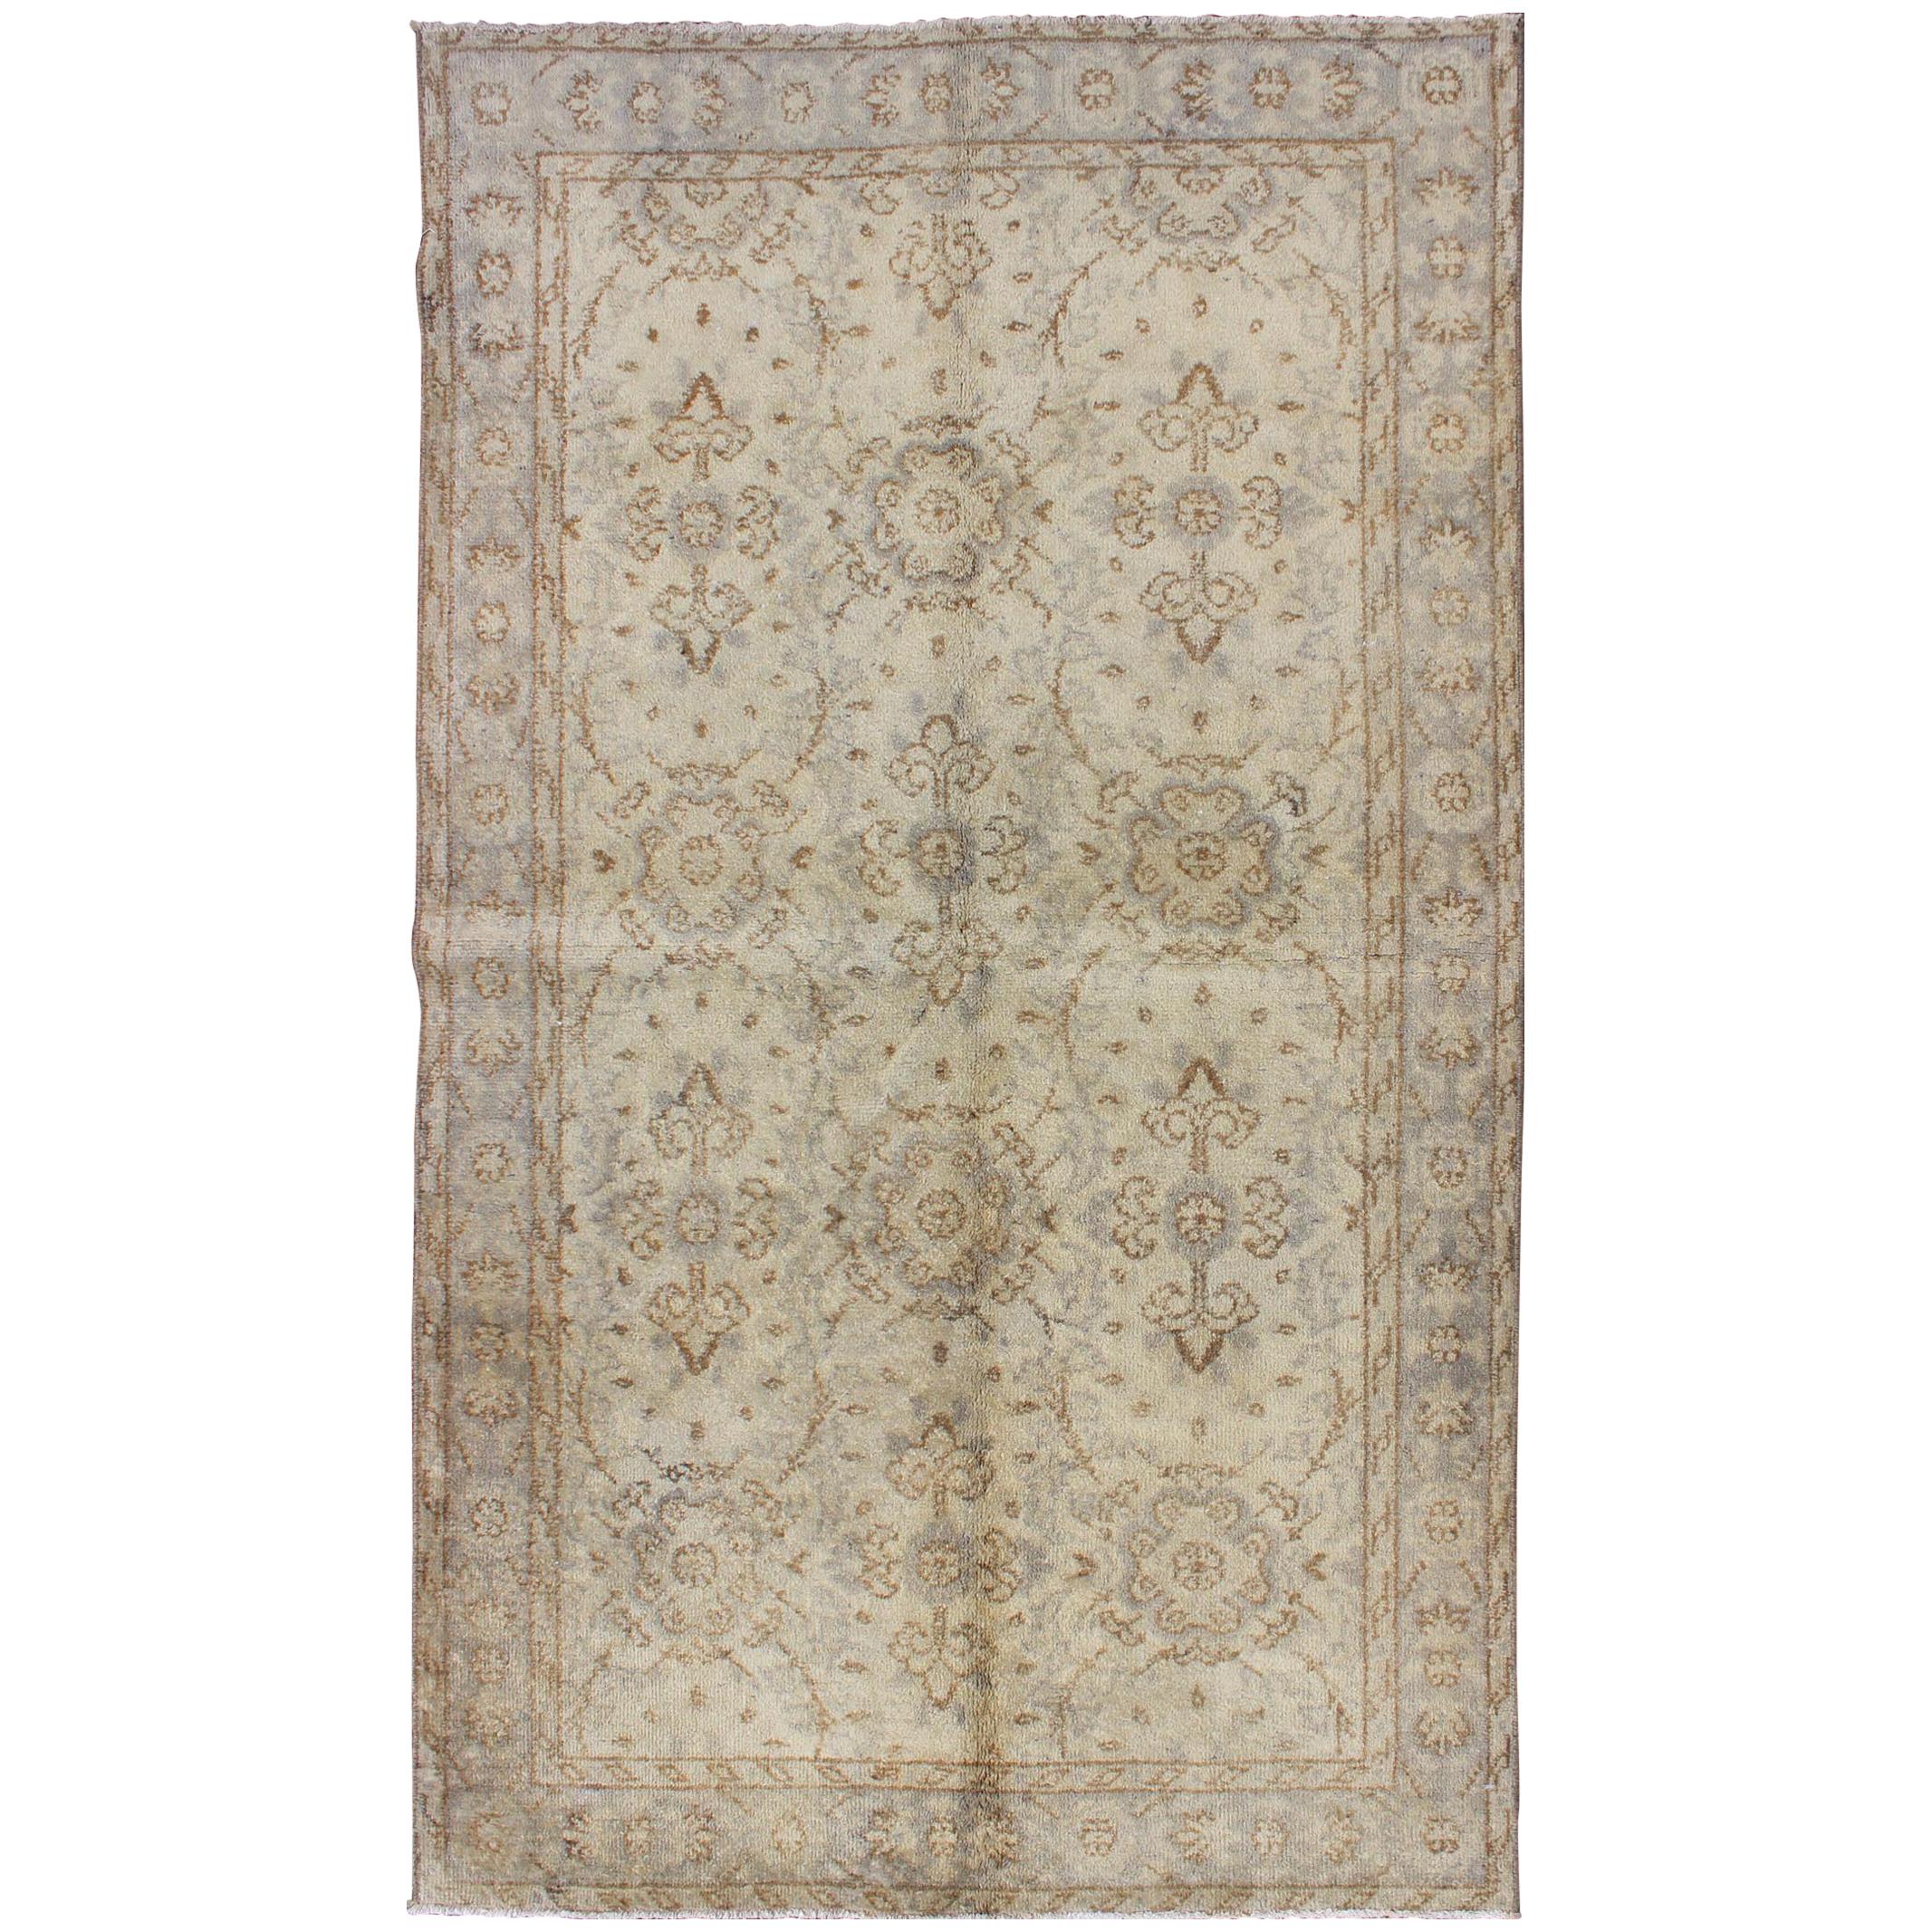 Vintage Turkish Oushak Rug with All-Over Floral Design in Ivory, Gray and Brown